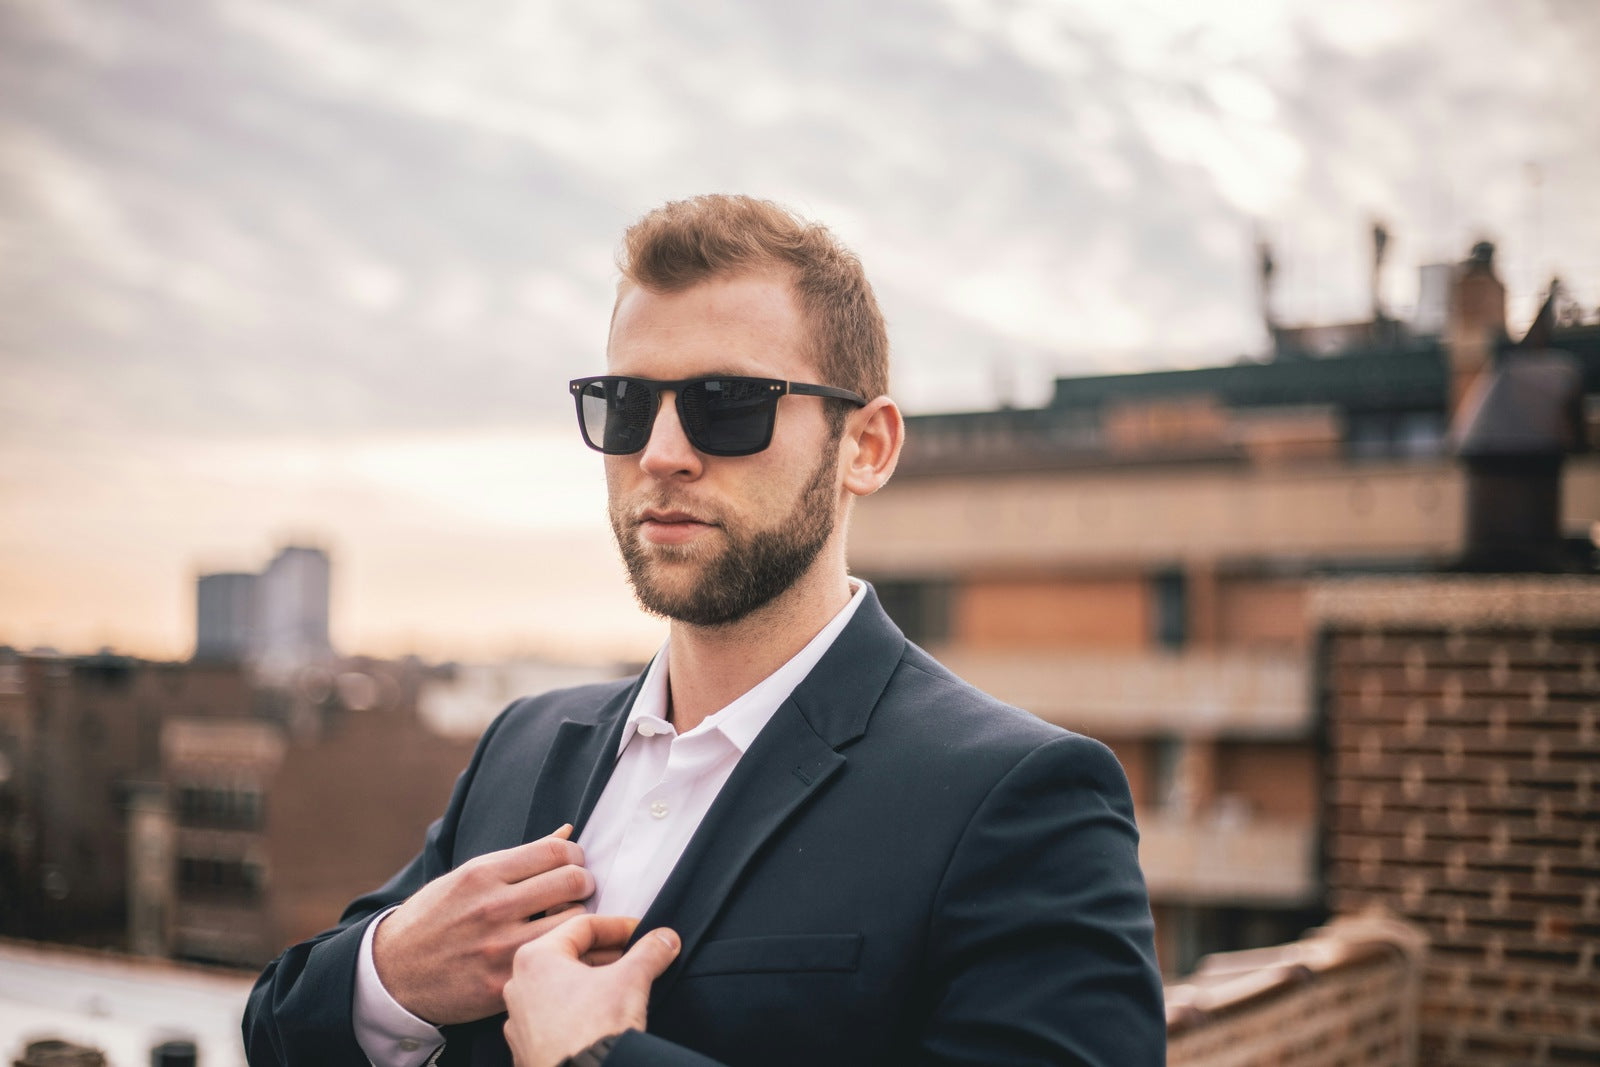 man with sunglasses on in blazer and dress shirt business casual outfit